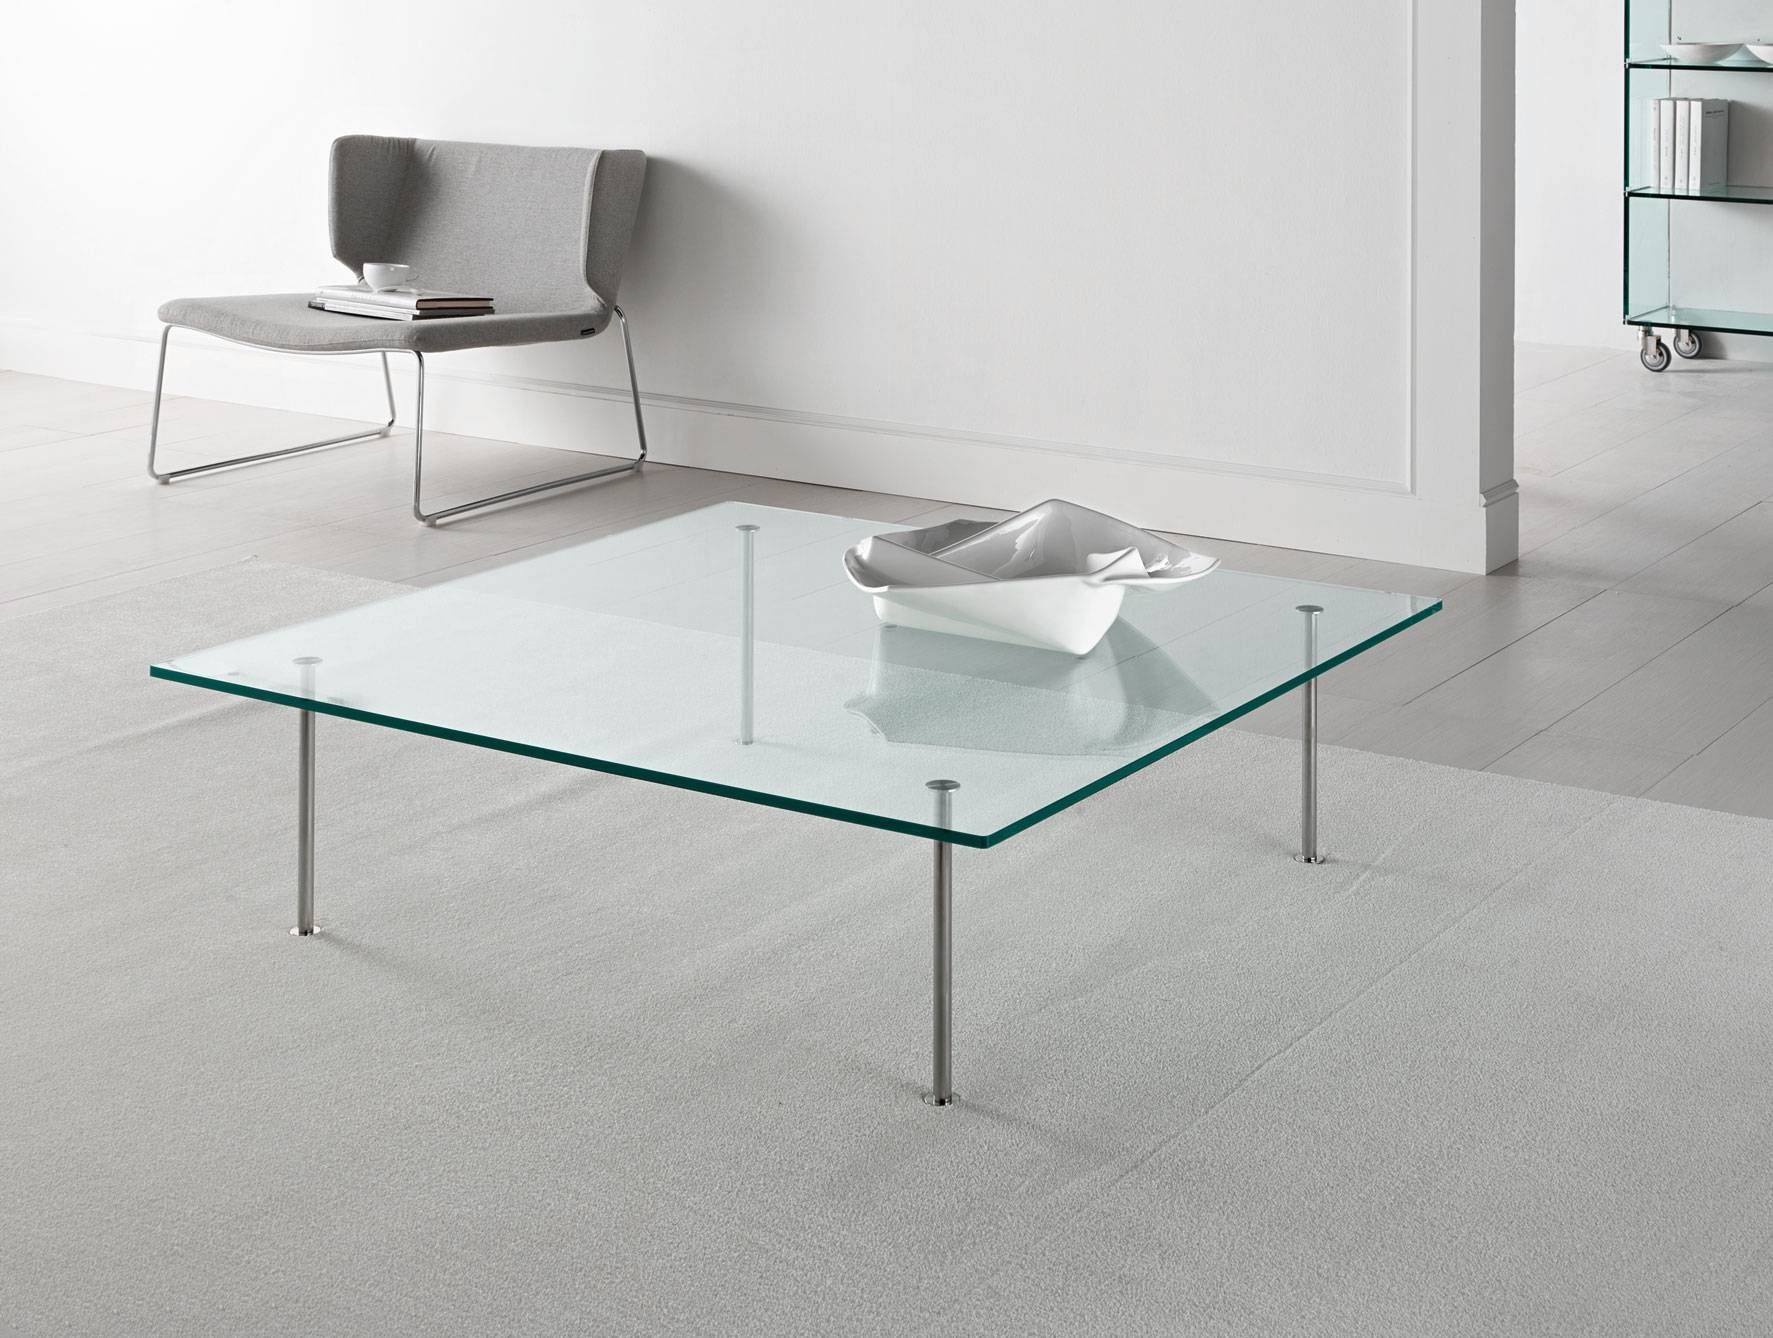 Designer Italian Luxury High End Coffee Tables: Nella Vetrina With Regard To Glass Coffee Tables (View 5 of 24)